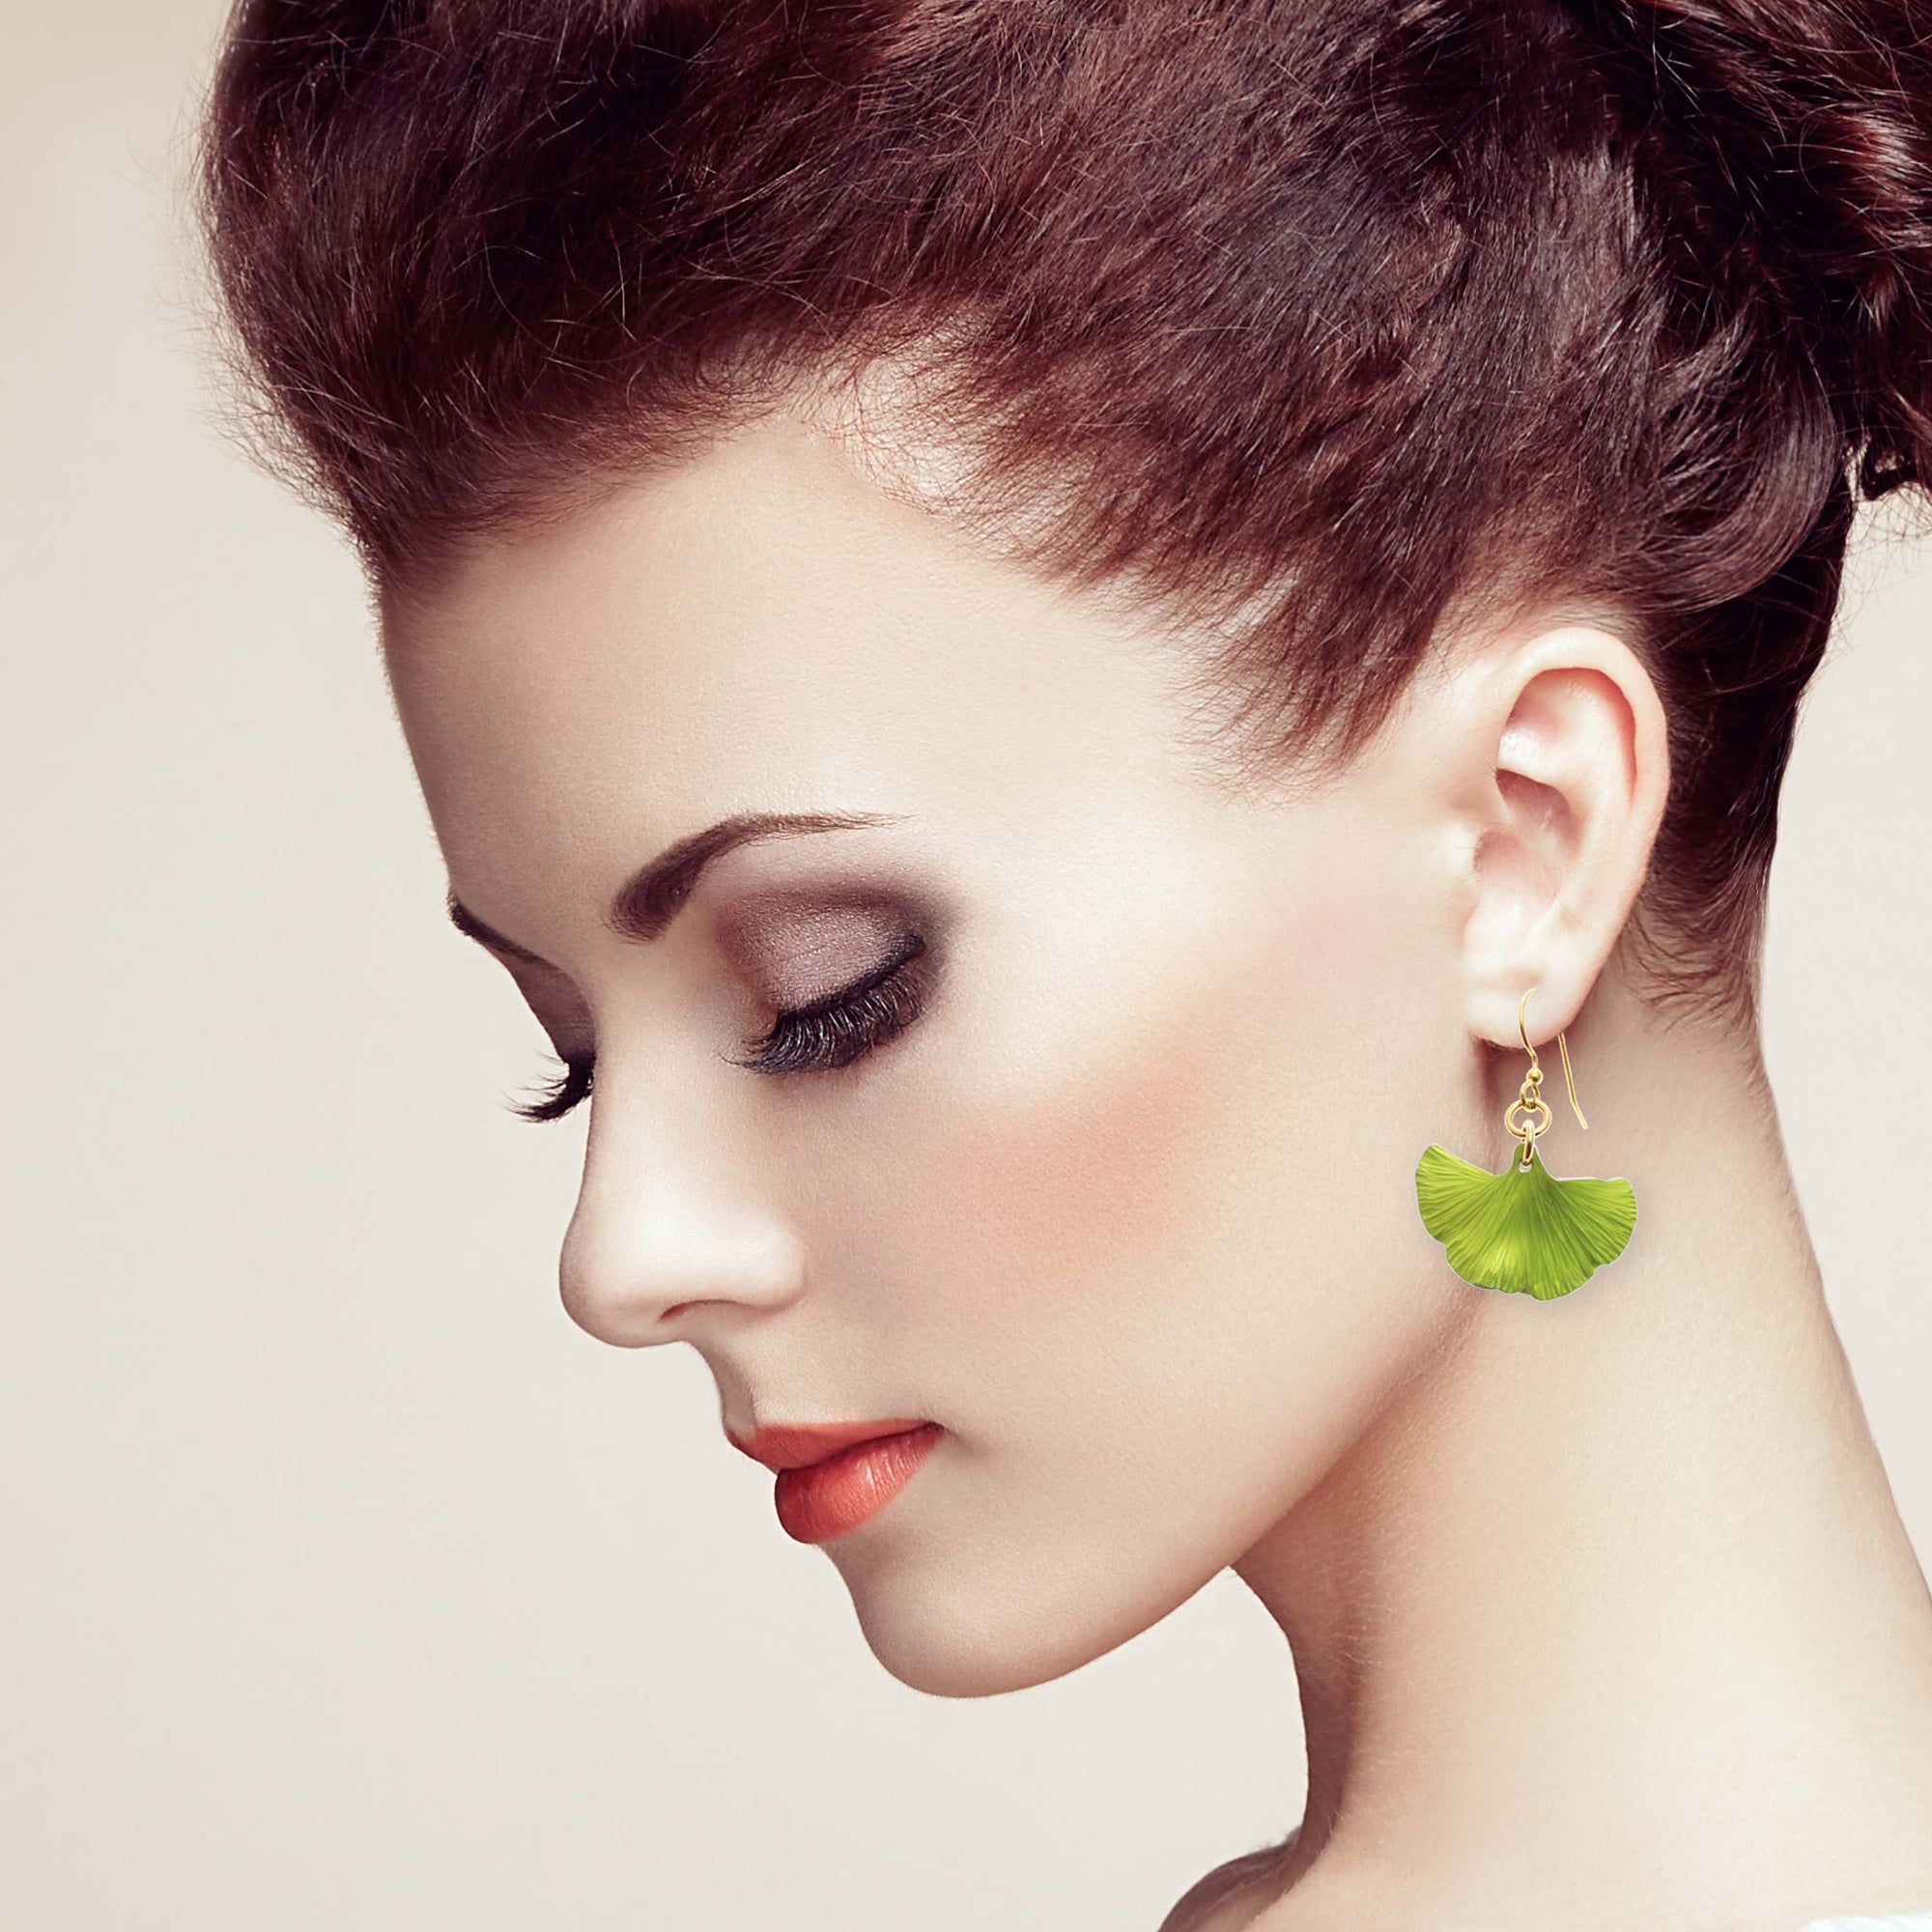 Elegant Woman with Red Hair Wearing Small Ginkgo Leaf Anodized Aluminum Sour Candy Apple Earrings